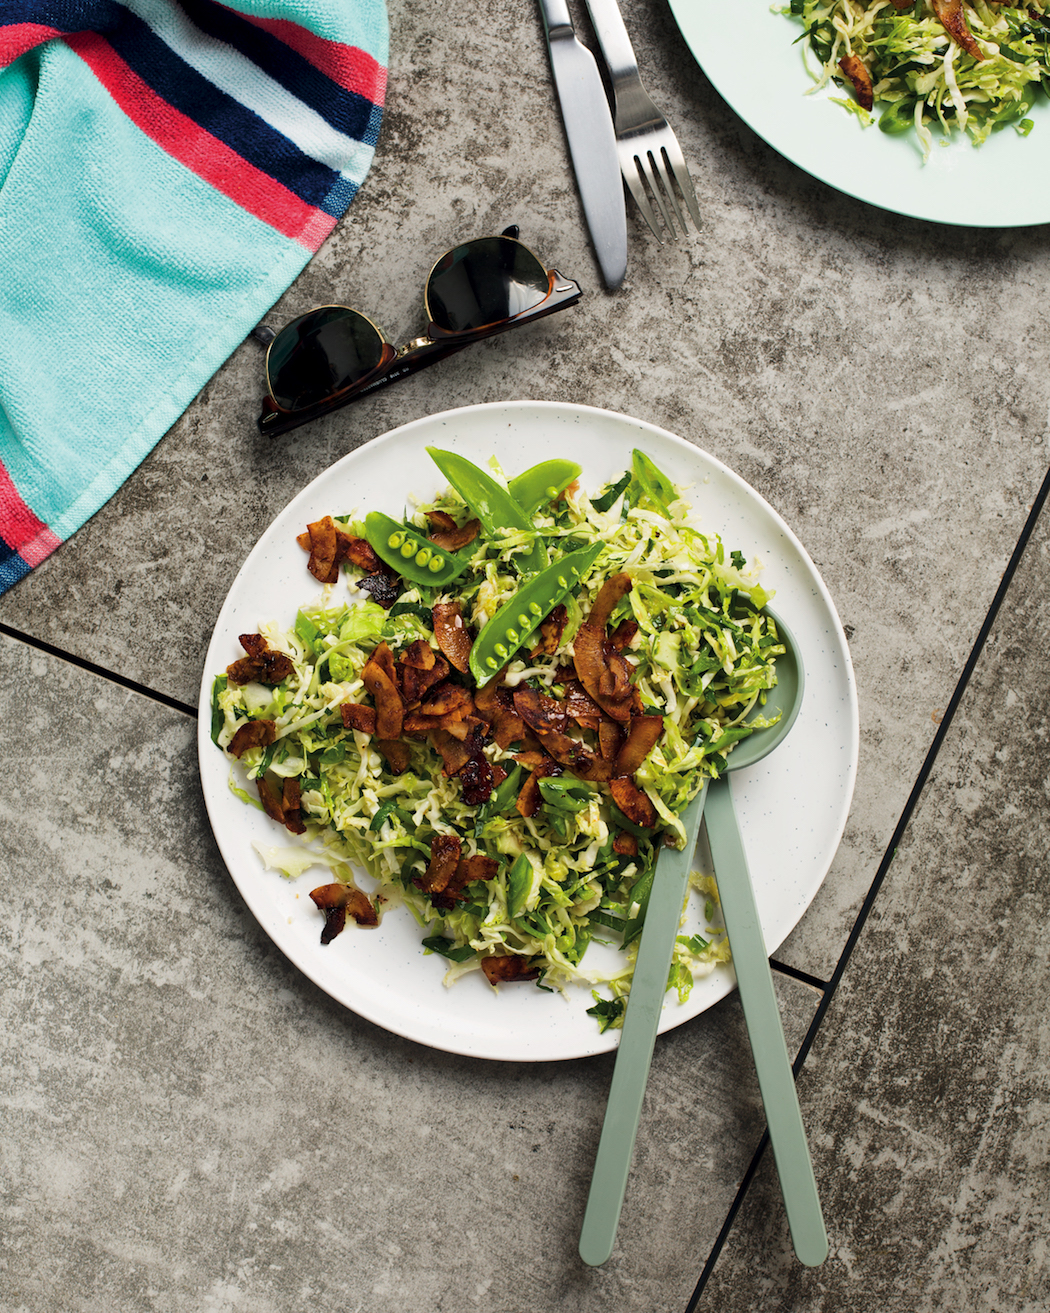 You are currently viewing Supergreen salad with coconut bacon